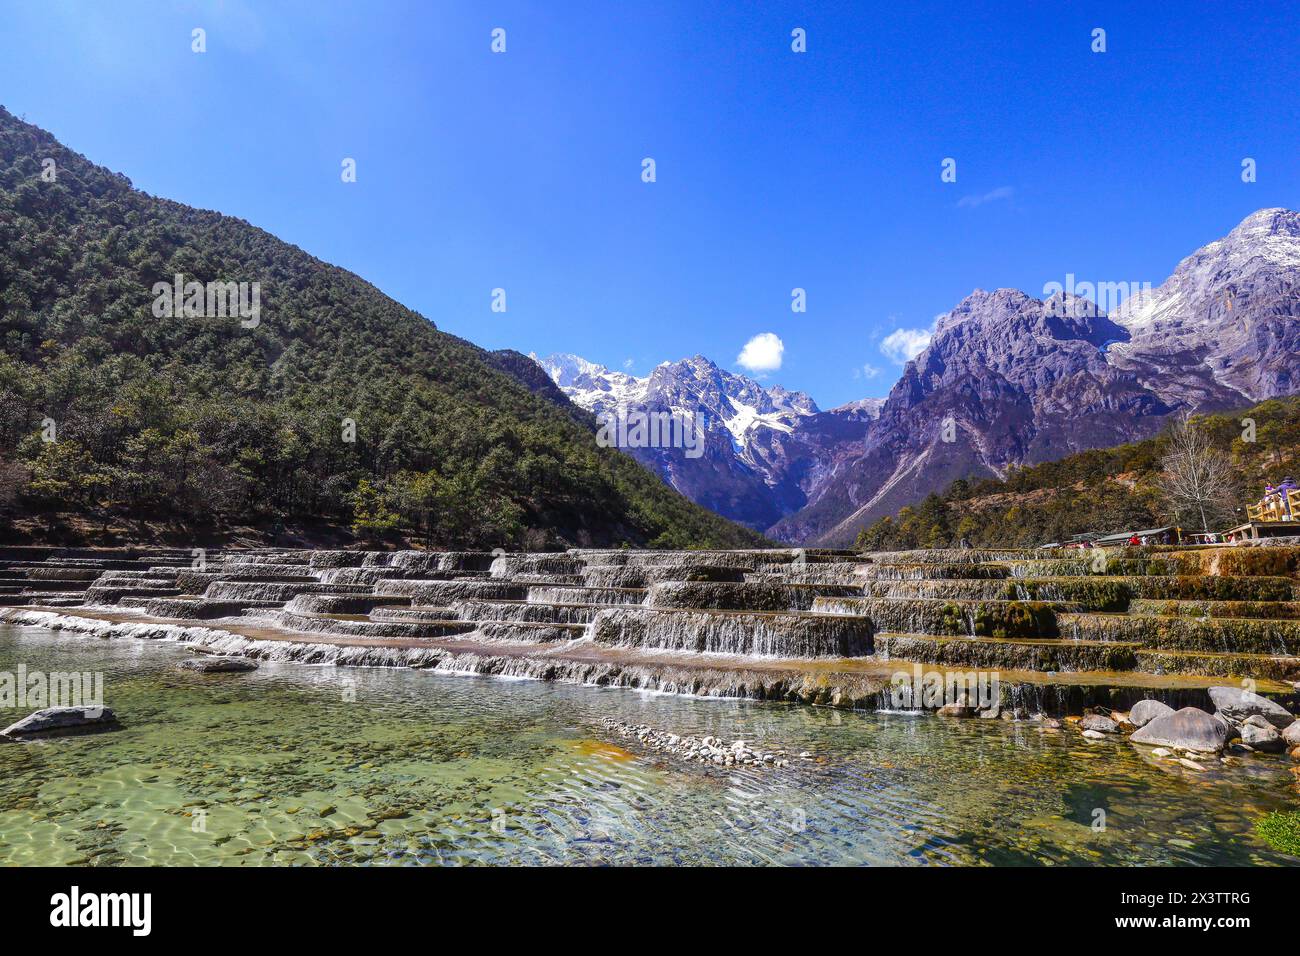 Stunning scenery of Blue Moon Valley in Lijiang, Yunnan, China, with the Jade Dragon Snow Mountain in the background Stock Photo